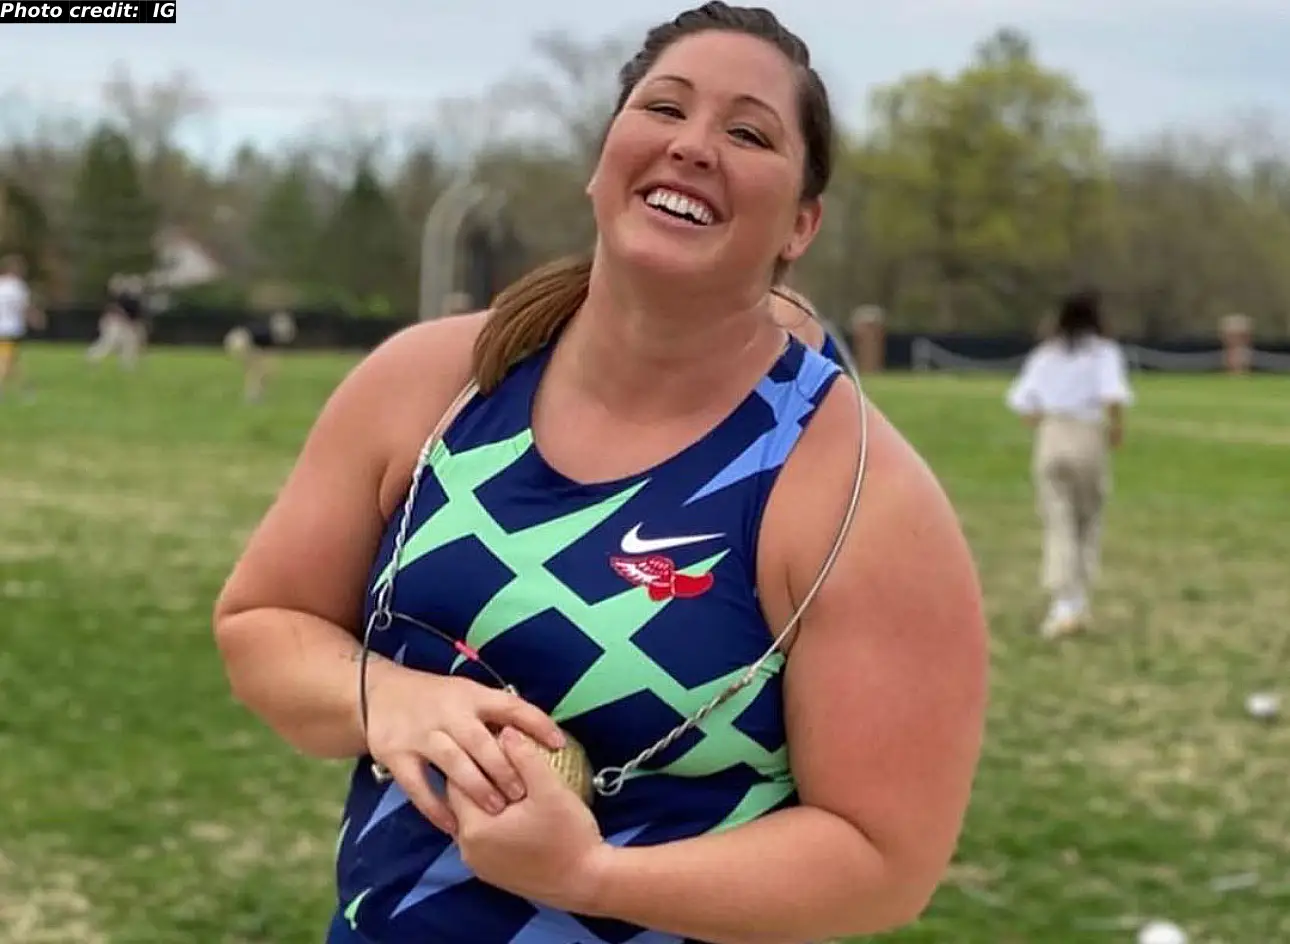 Deanna Price throws 77.25m, wins Hammer at Iron Wood Throws Classic